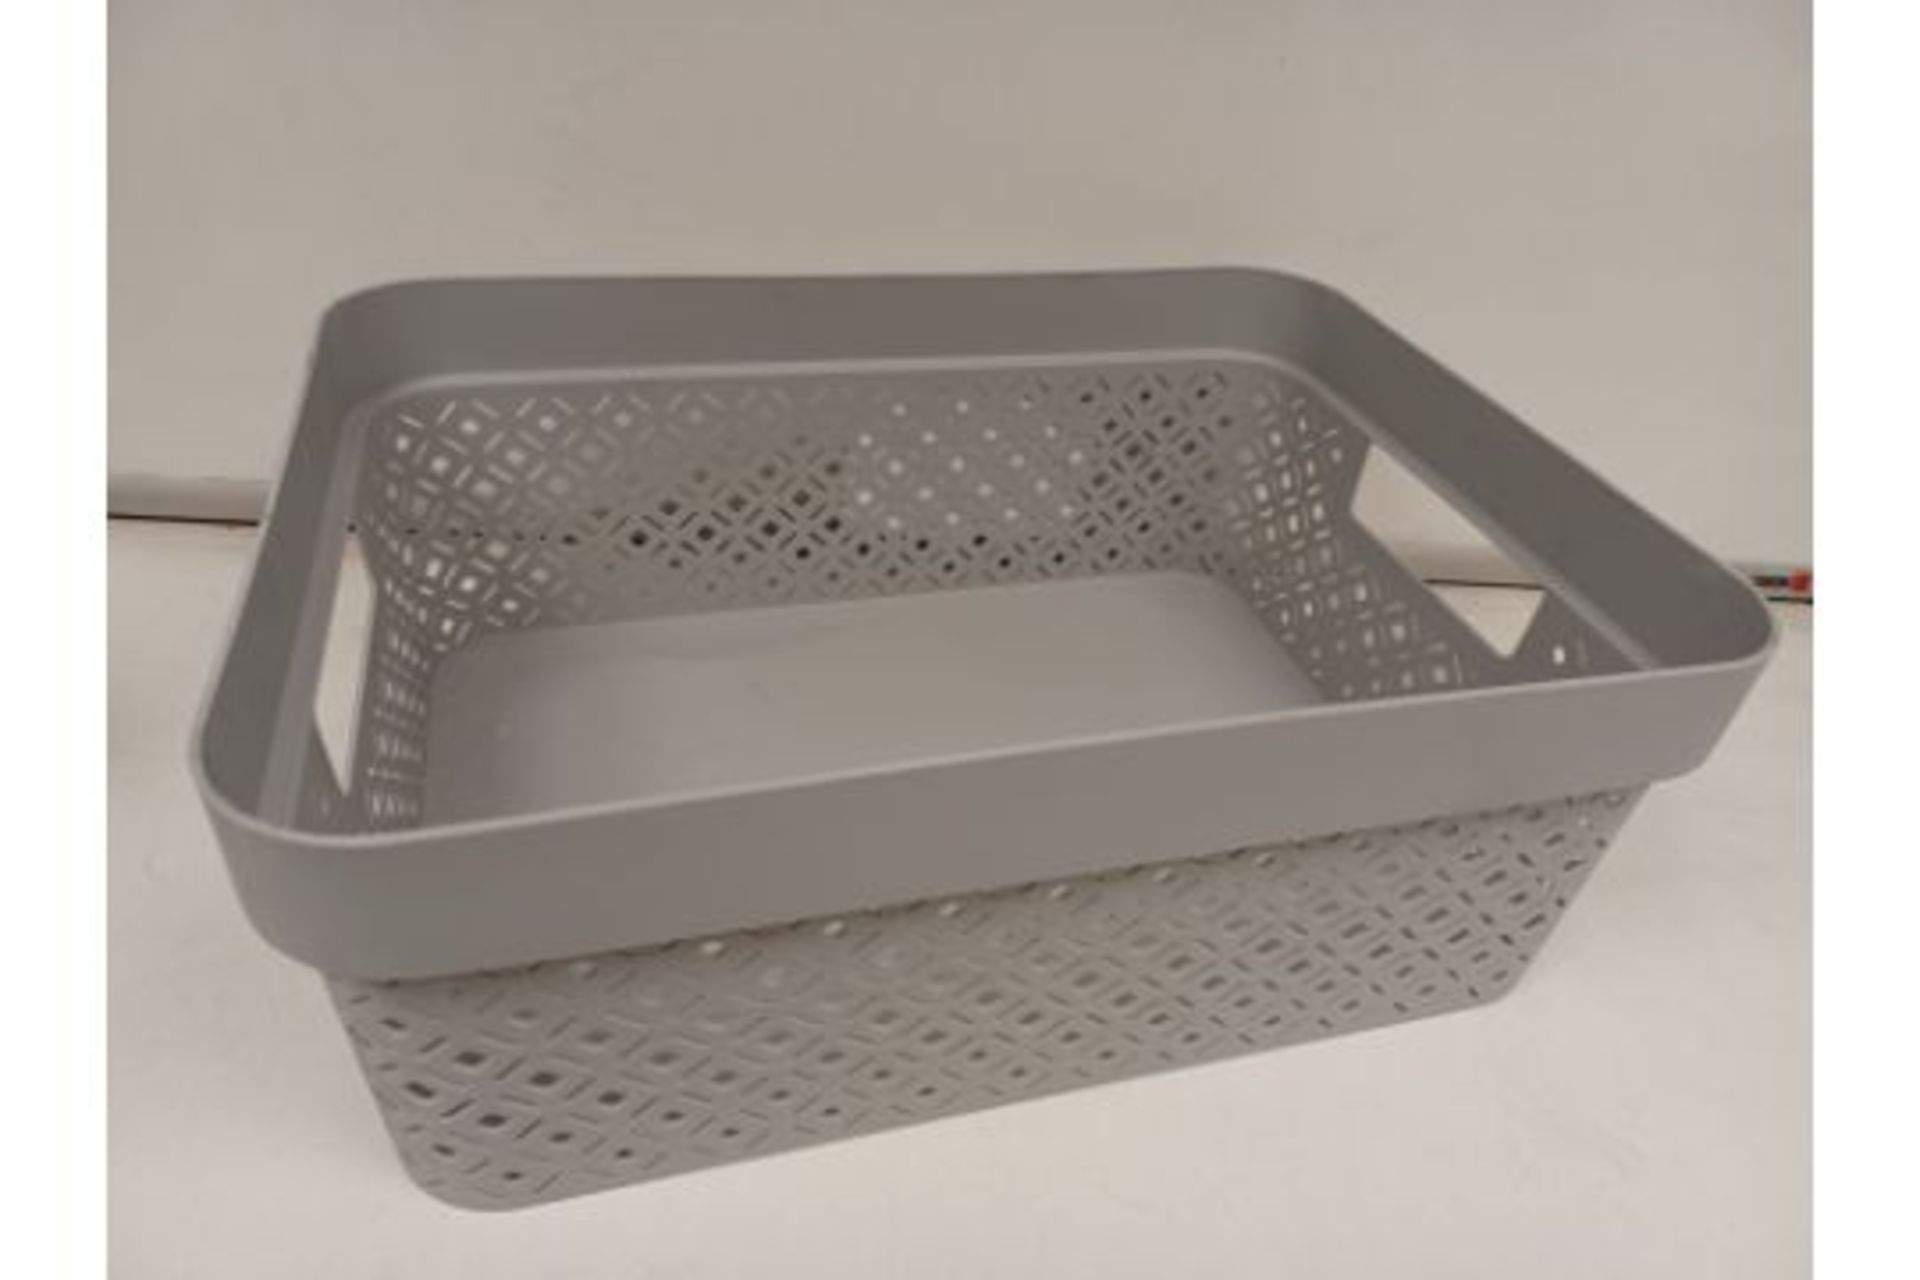 PALLET TO CONTAIN 352 X New Curver Terazzo Storage Basket - 11L - Grey. (253427). Curver Terrazzo - Image 2 of 2